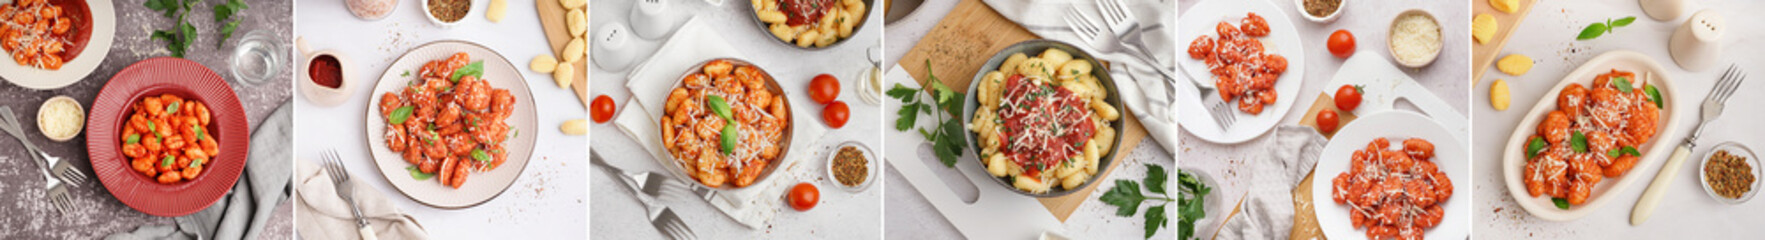 Collage of tasty gnocchi with tomato sauce and cheese on table